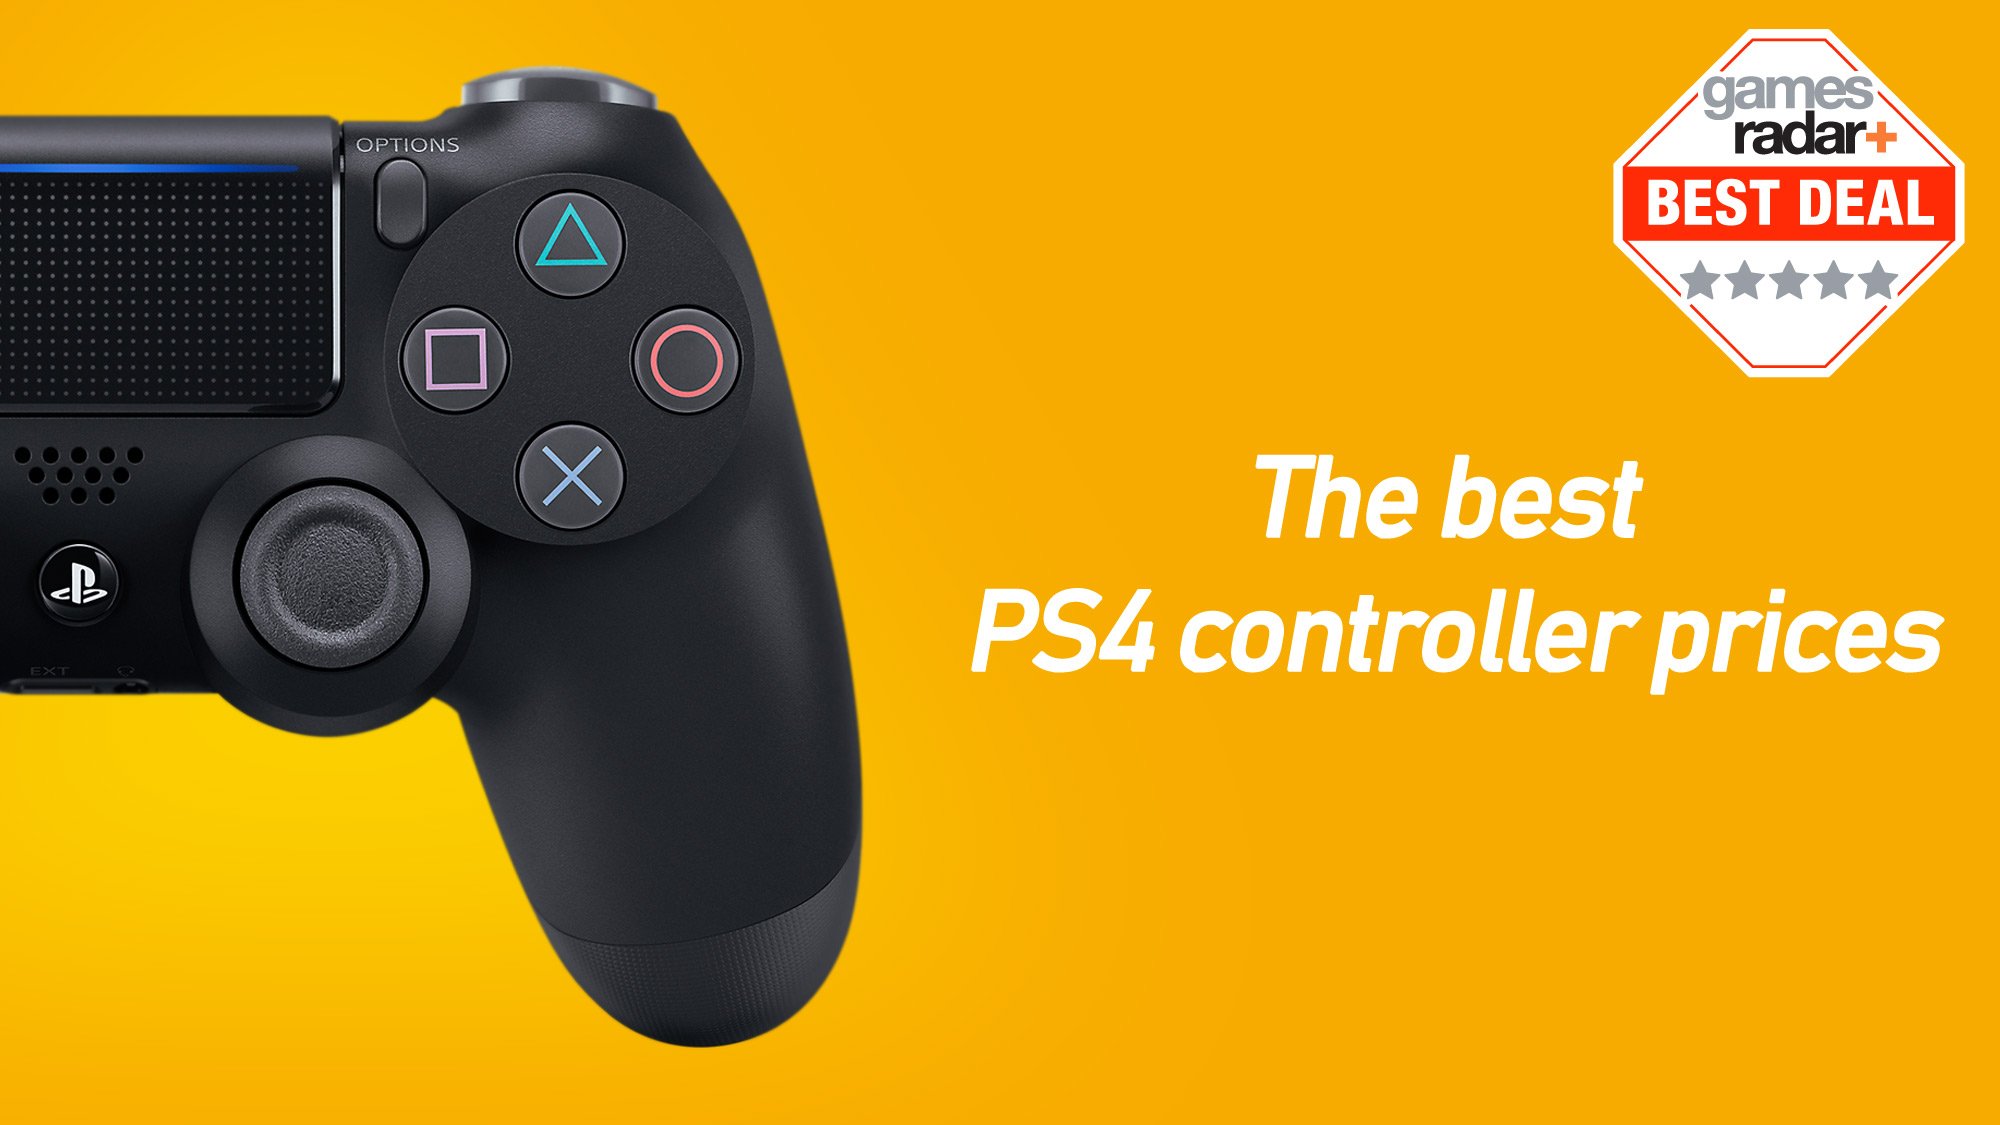 Seeinglooking: Does Ps3 Move Controller Work On Ps4